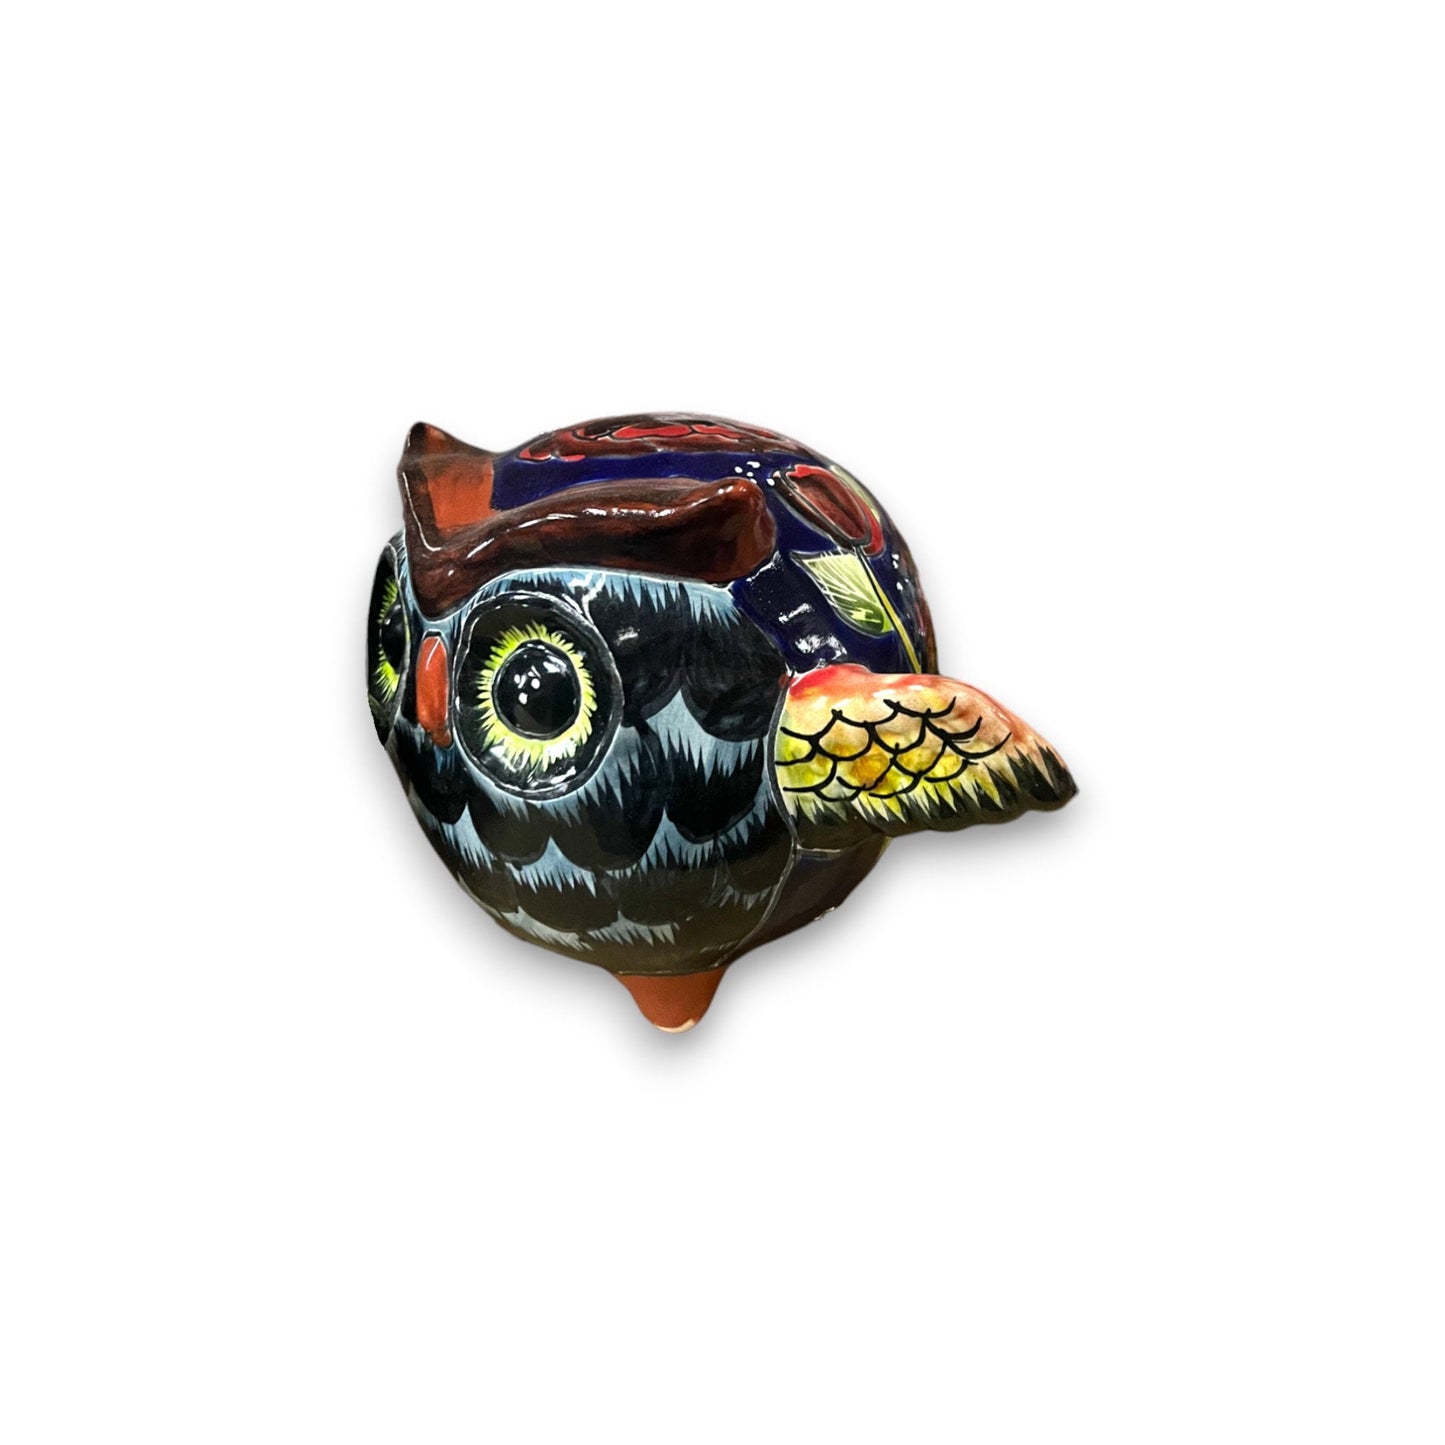 Colorful Hand-Painted Talavera Owl Statue | Artisanal Small Owl Sculpture